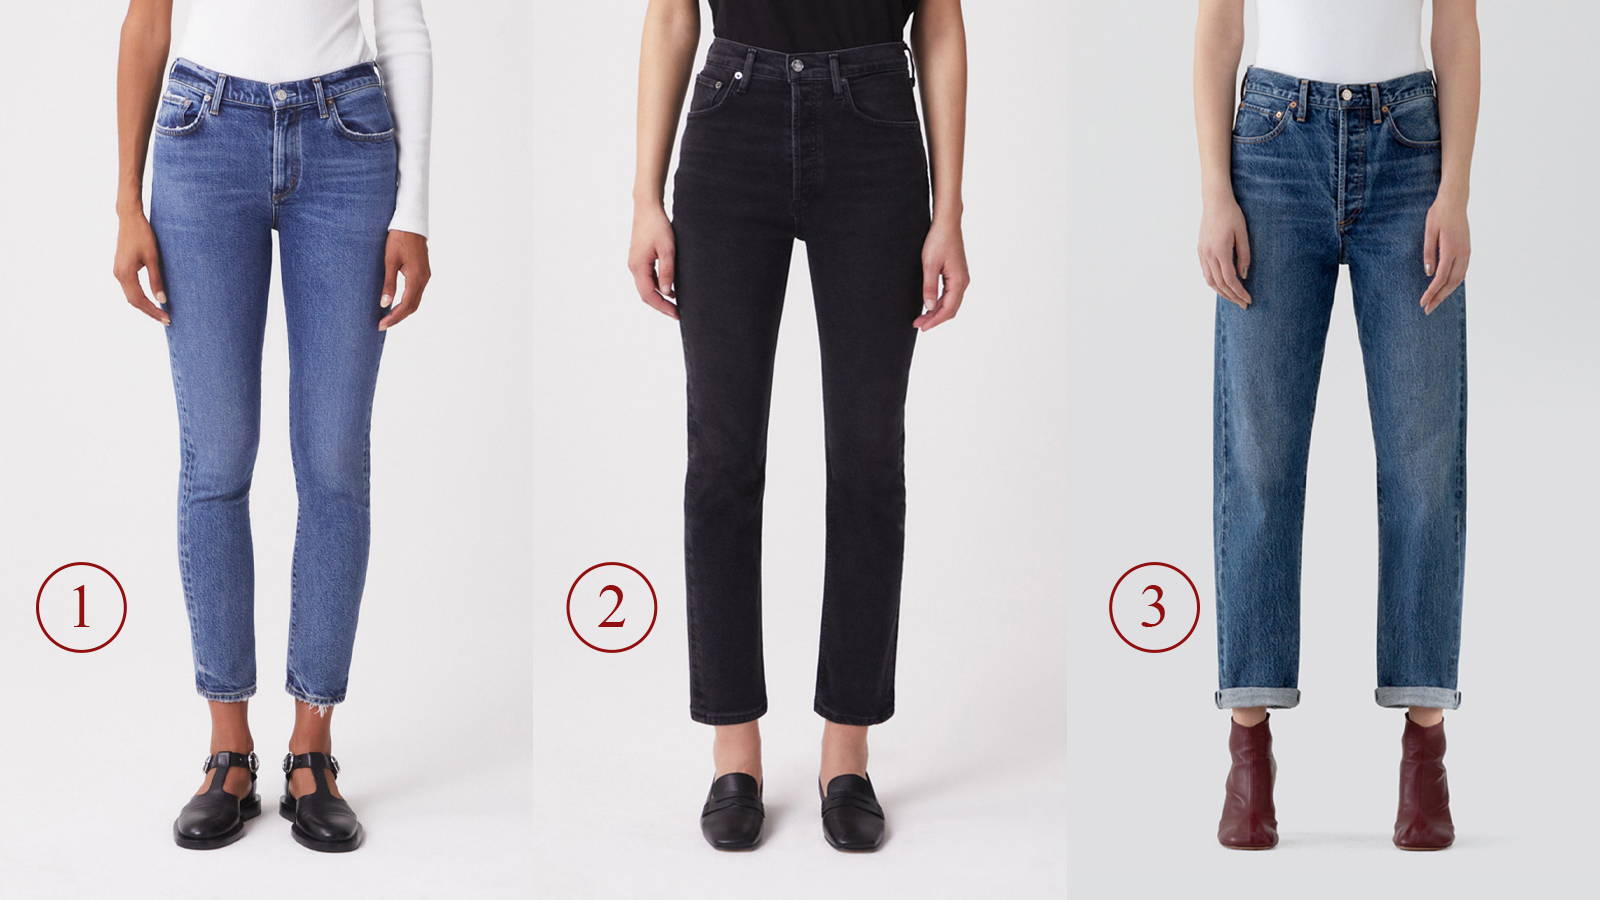 Three Agolde look book images showcasing the different styles of jeans.